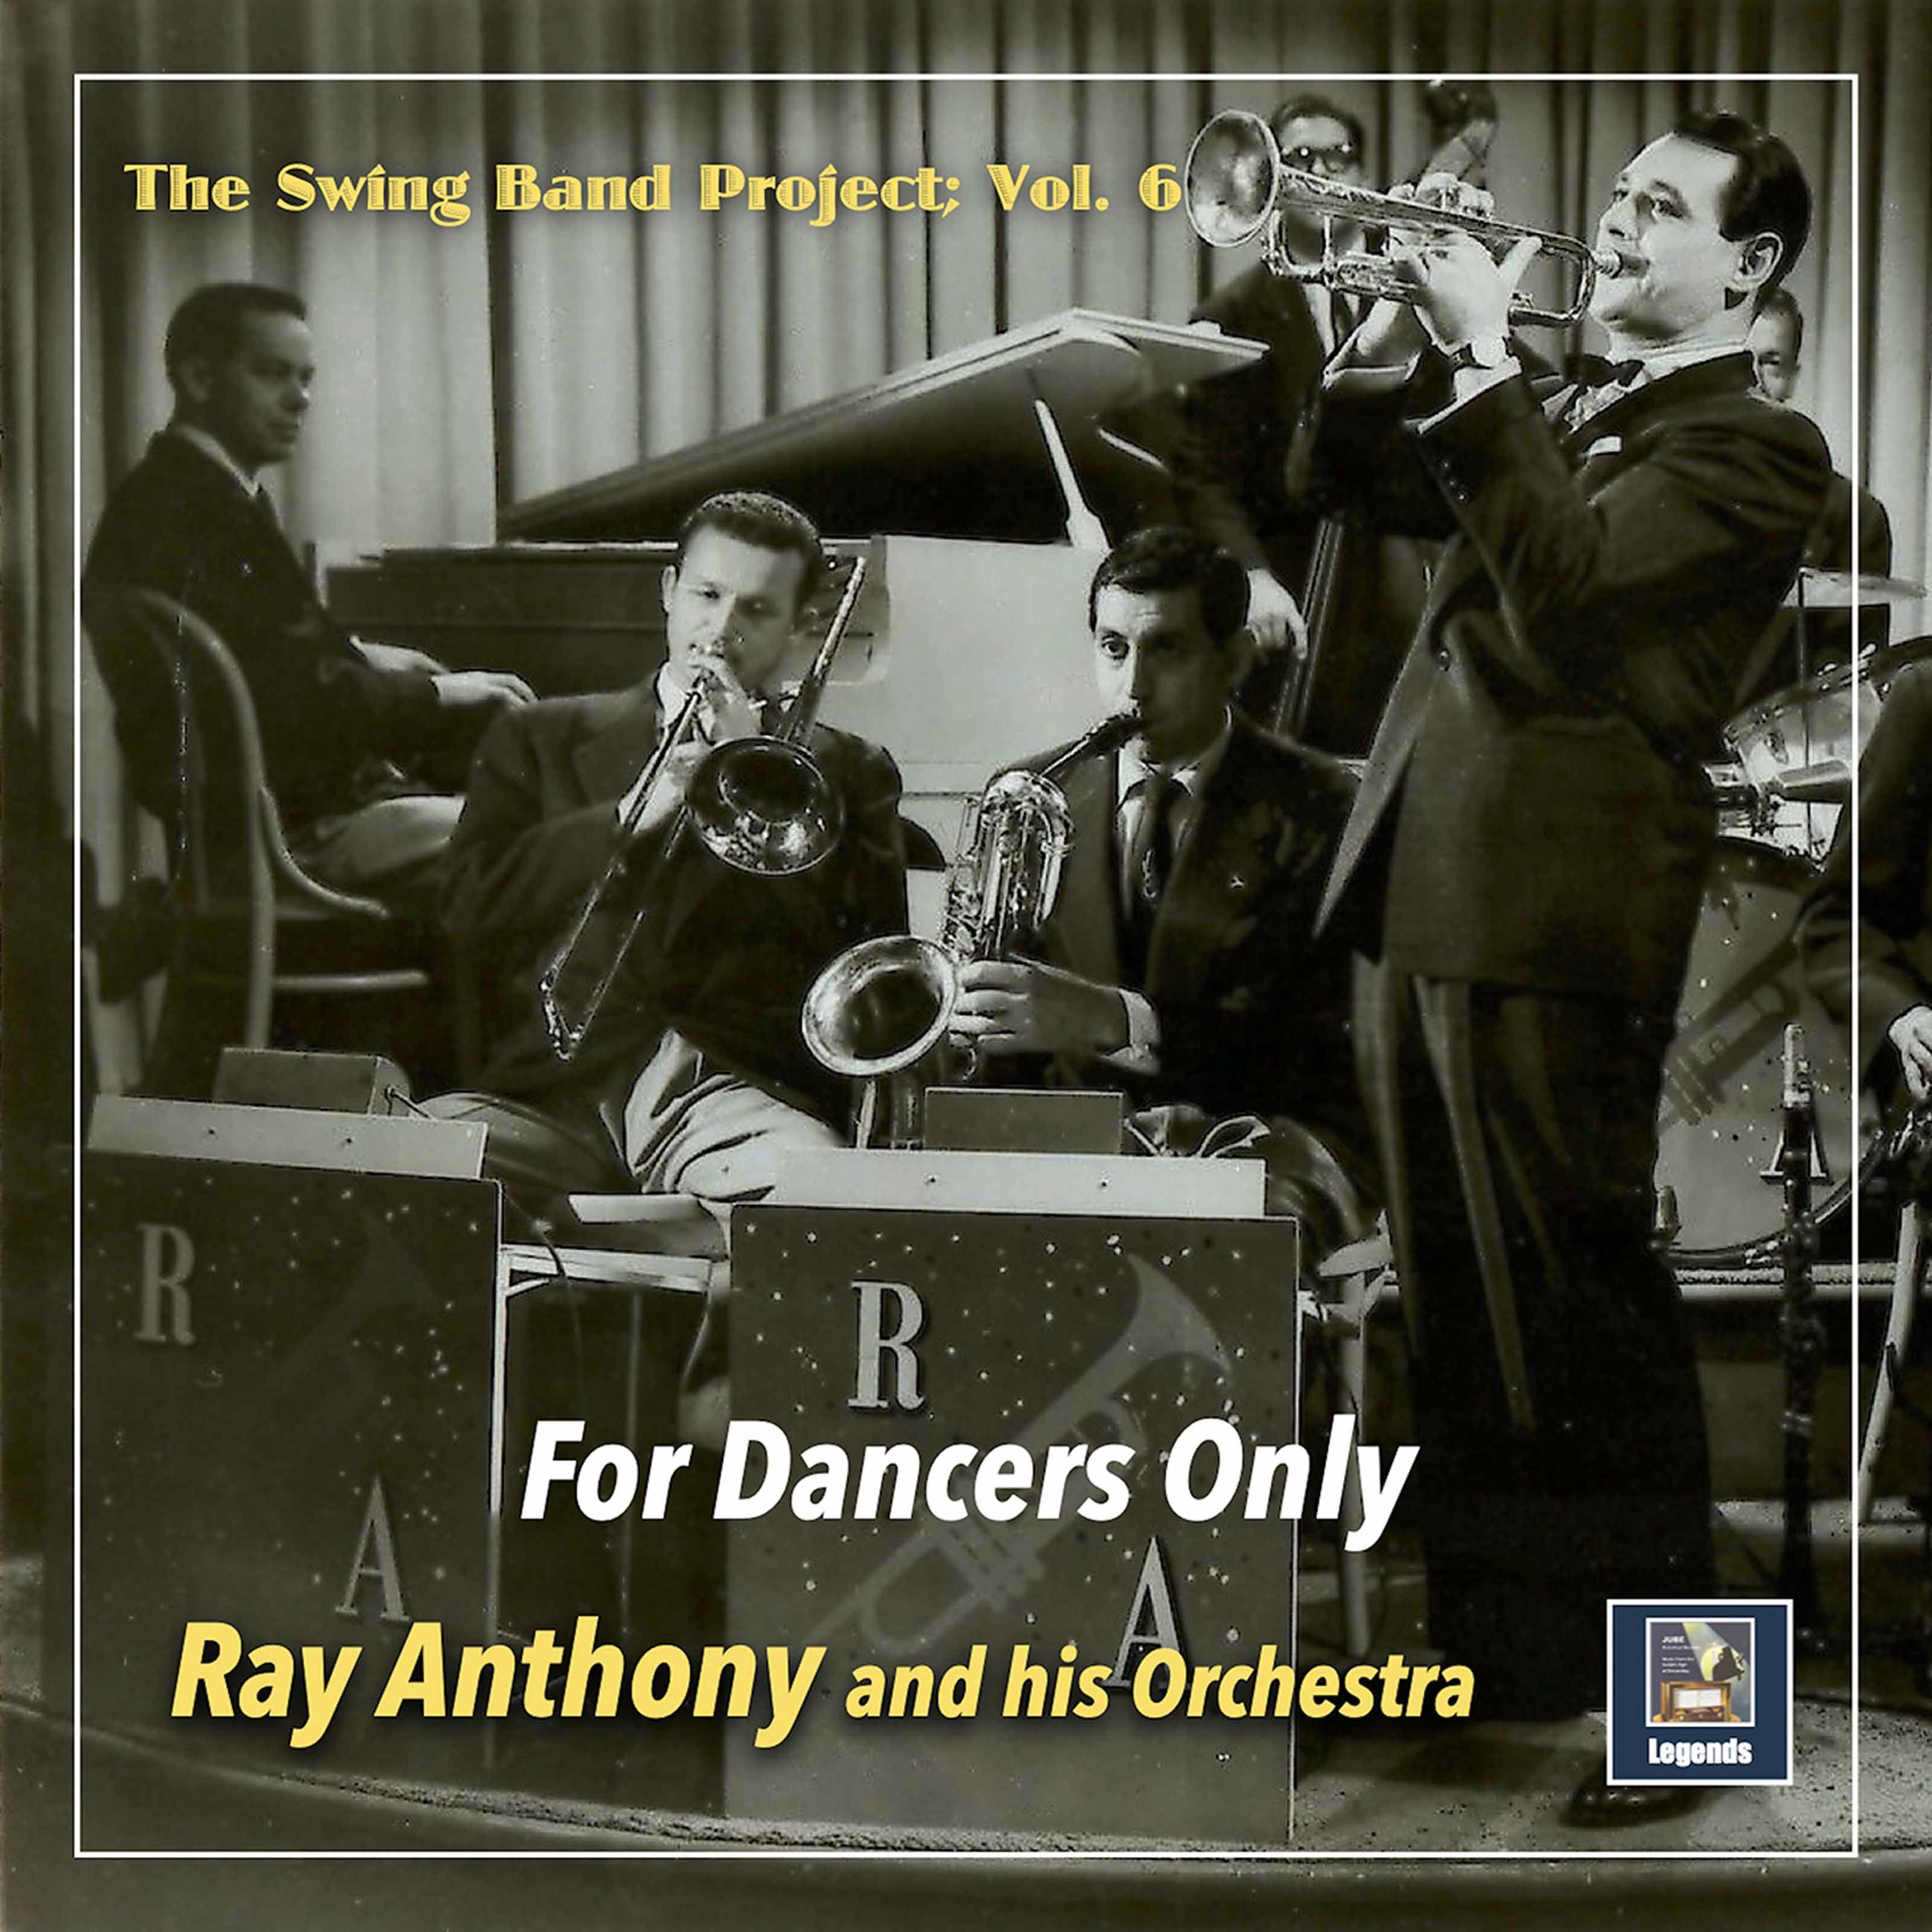 Ray Anthony and His Orchestra – The Swing Band Project, Vol. 6: For Dancers Only (2021) [FLAC 24bit/48kHz]